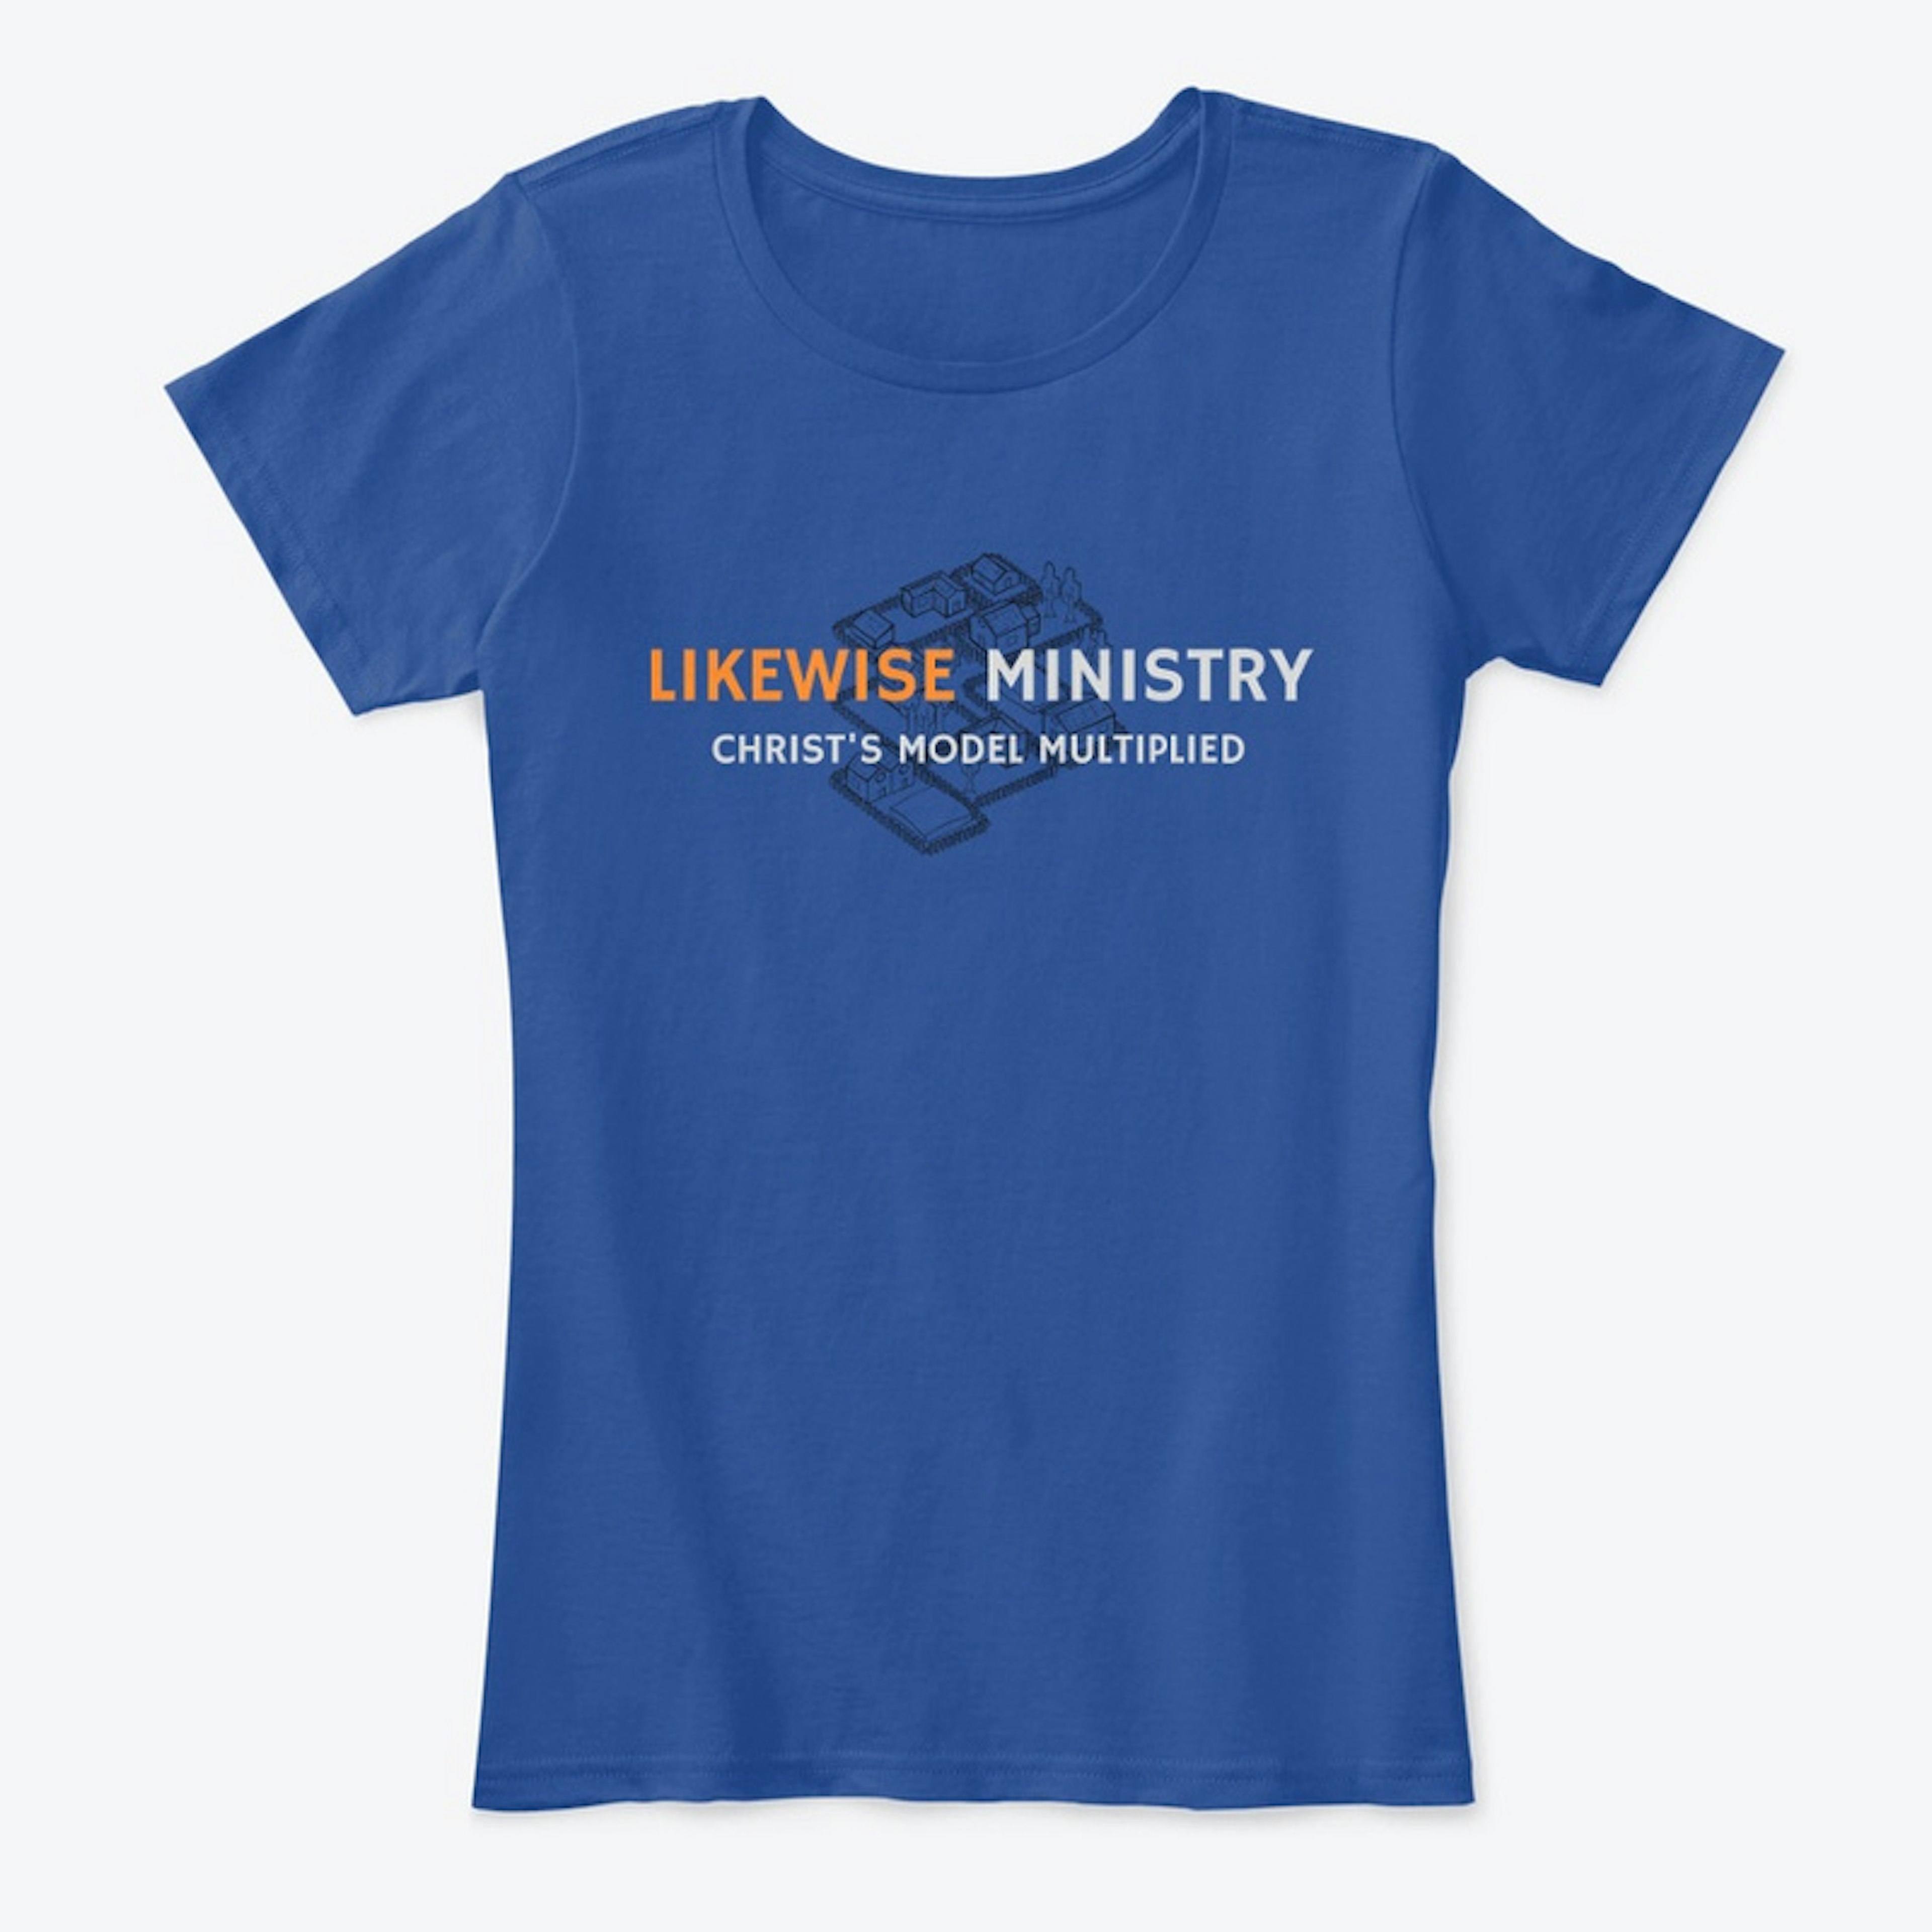 Likewise Ministry